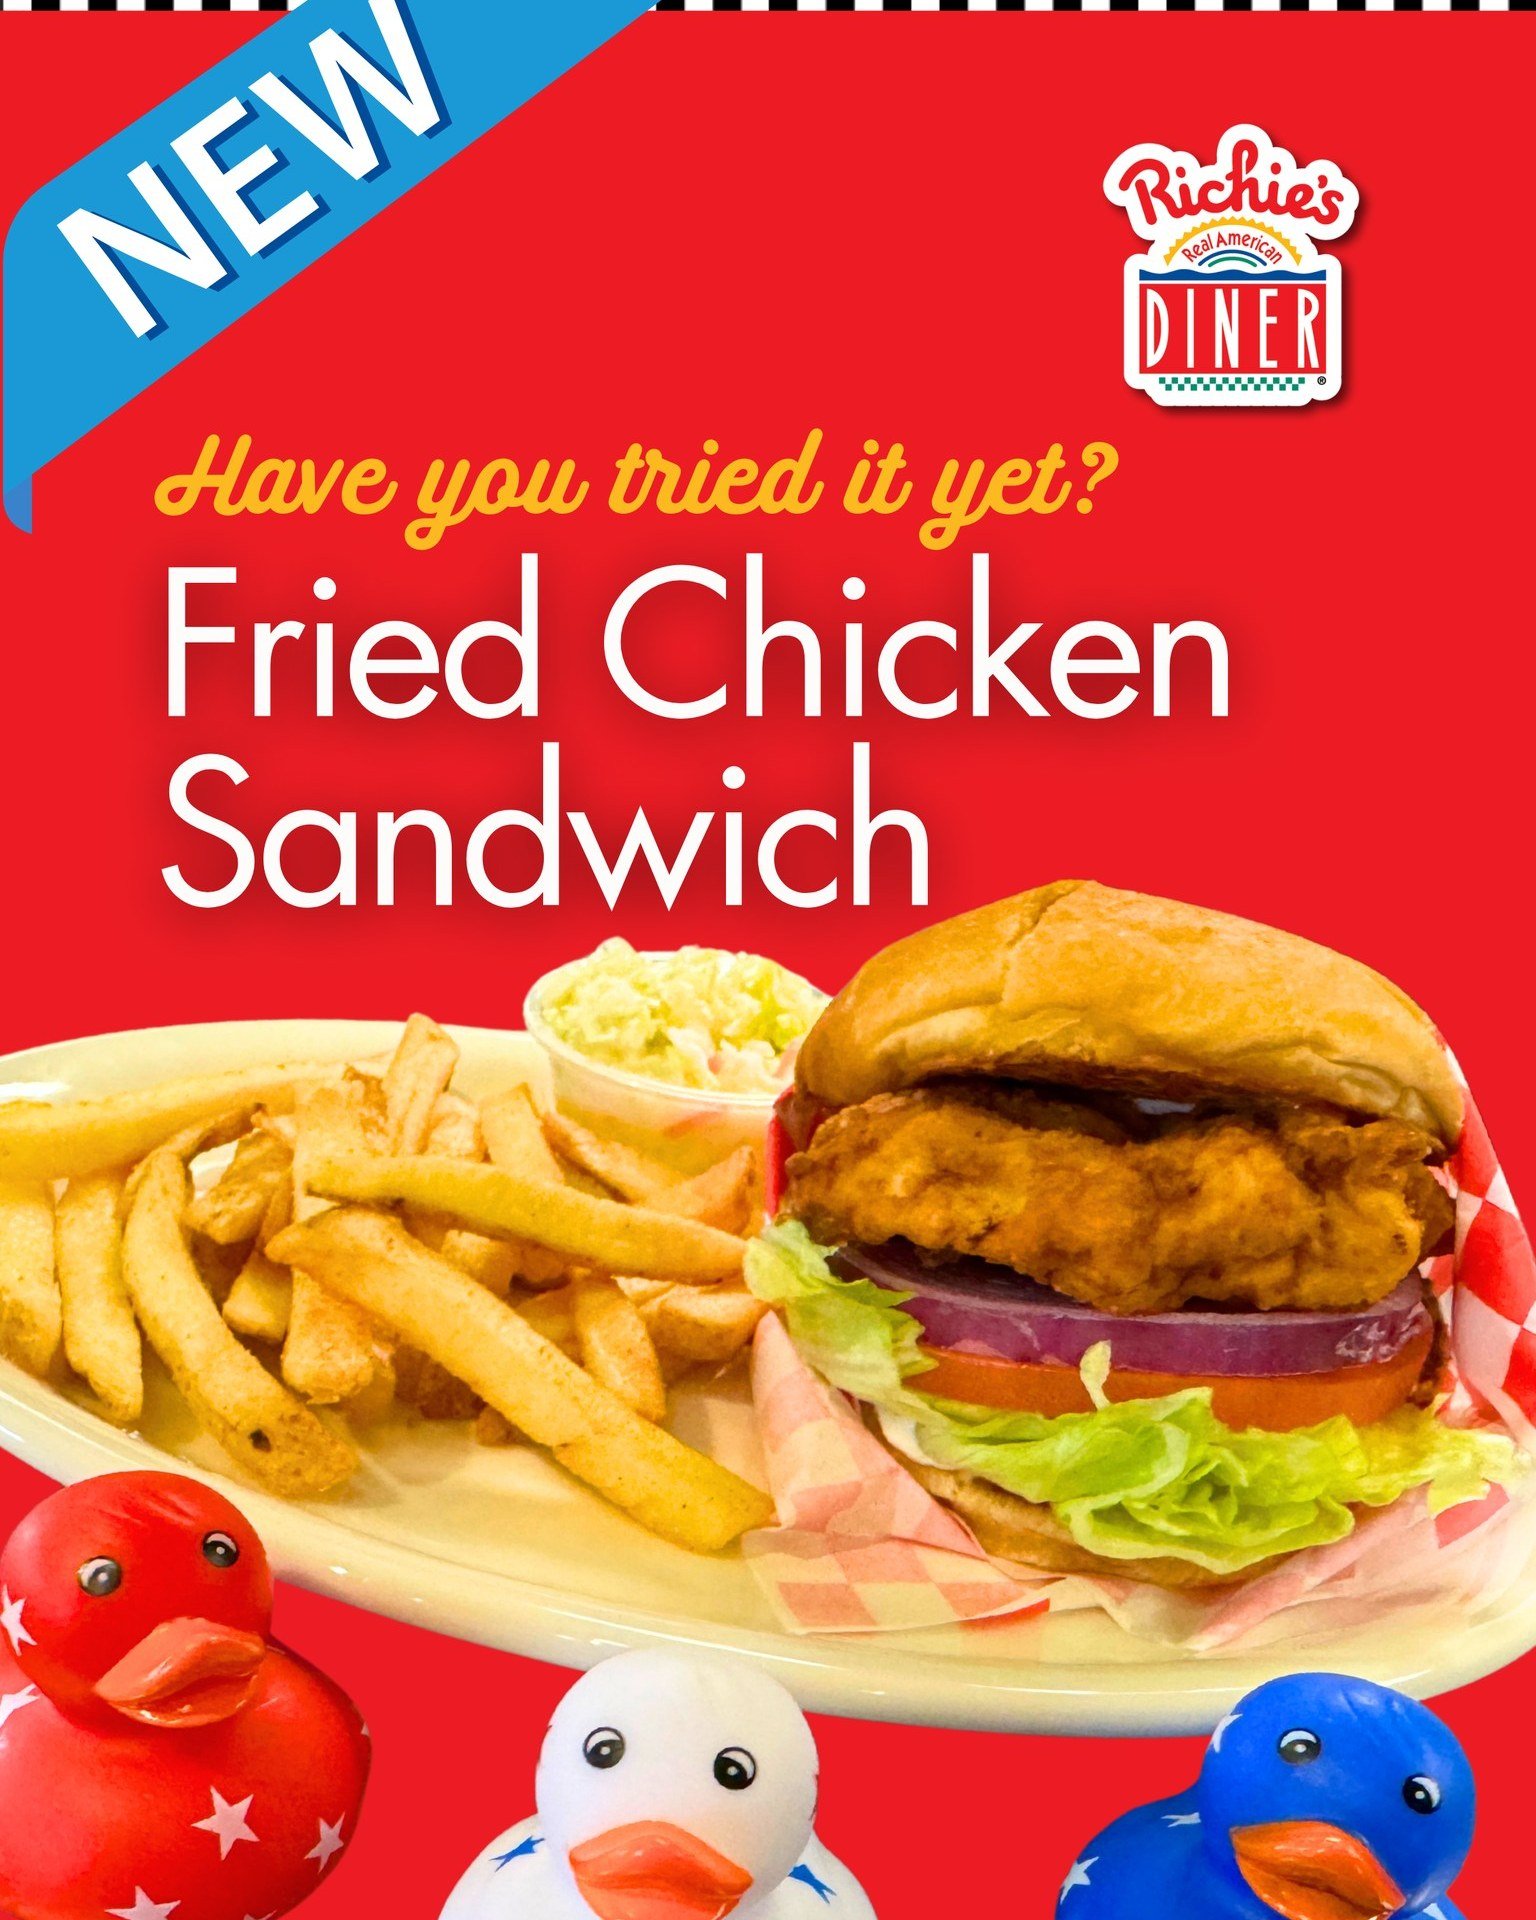 Have you tried it yet? Richie&rsquo;s Diner Rancho Cucamonga has a NEW Fried Chicken Sandwich. Served with our made-onsite French Fries and a side of Cole Slaw. Good Country Cookin&rsquo; in every bite.  Extra napkins available at no charge!